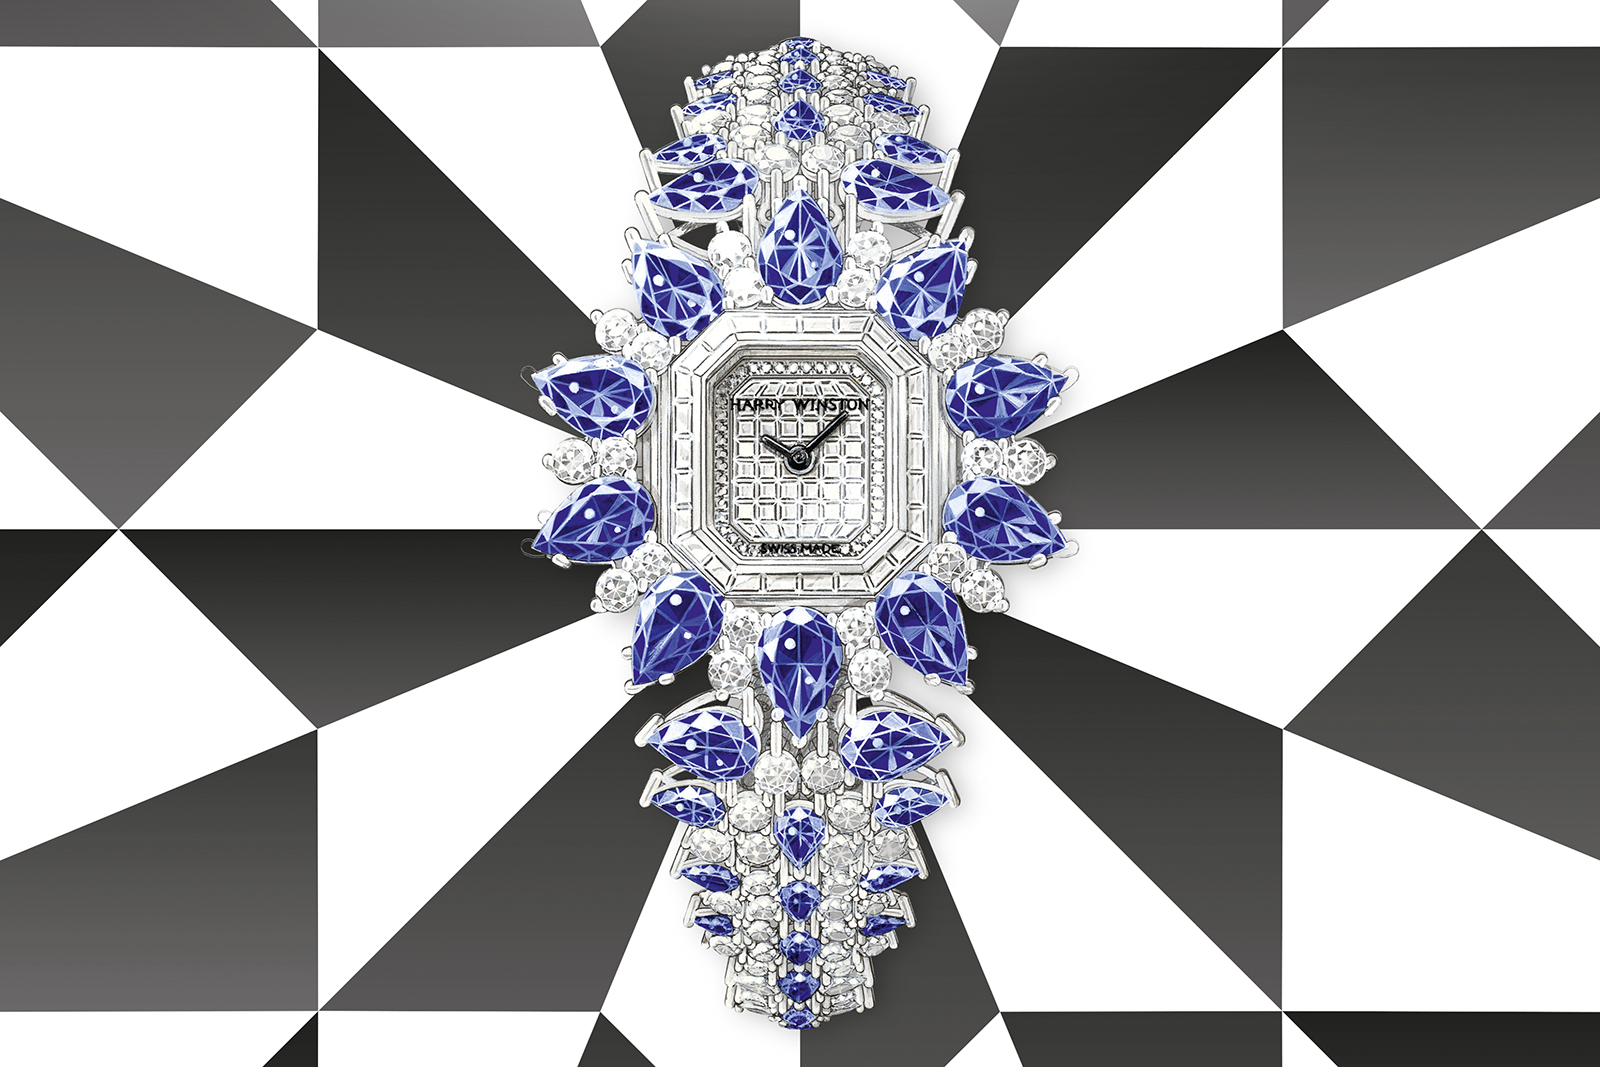 ‘Ultimate Marble Marquetry’ by Harry Winston